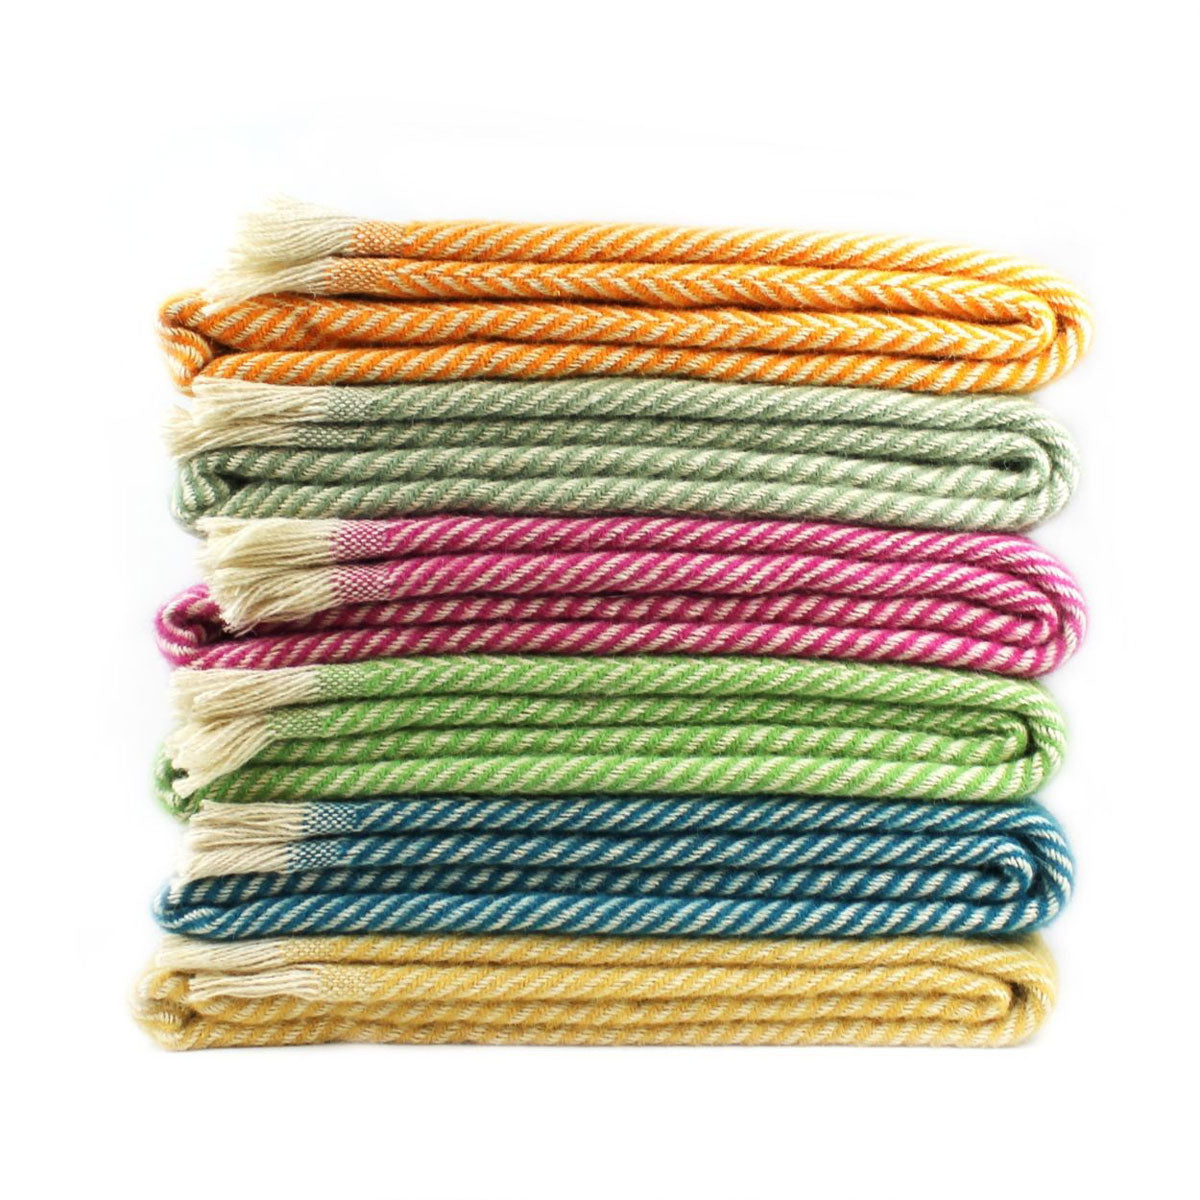 Recycled Brights Chevron Wool Throws